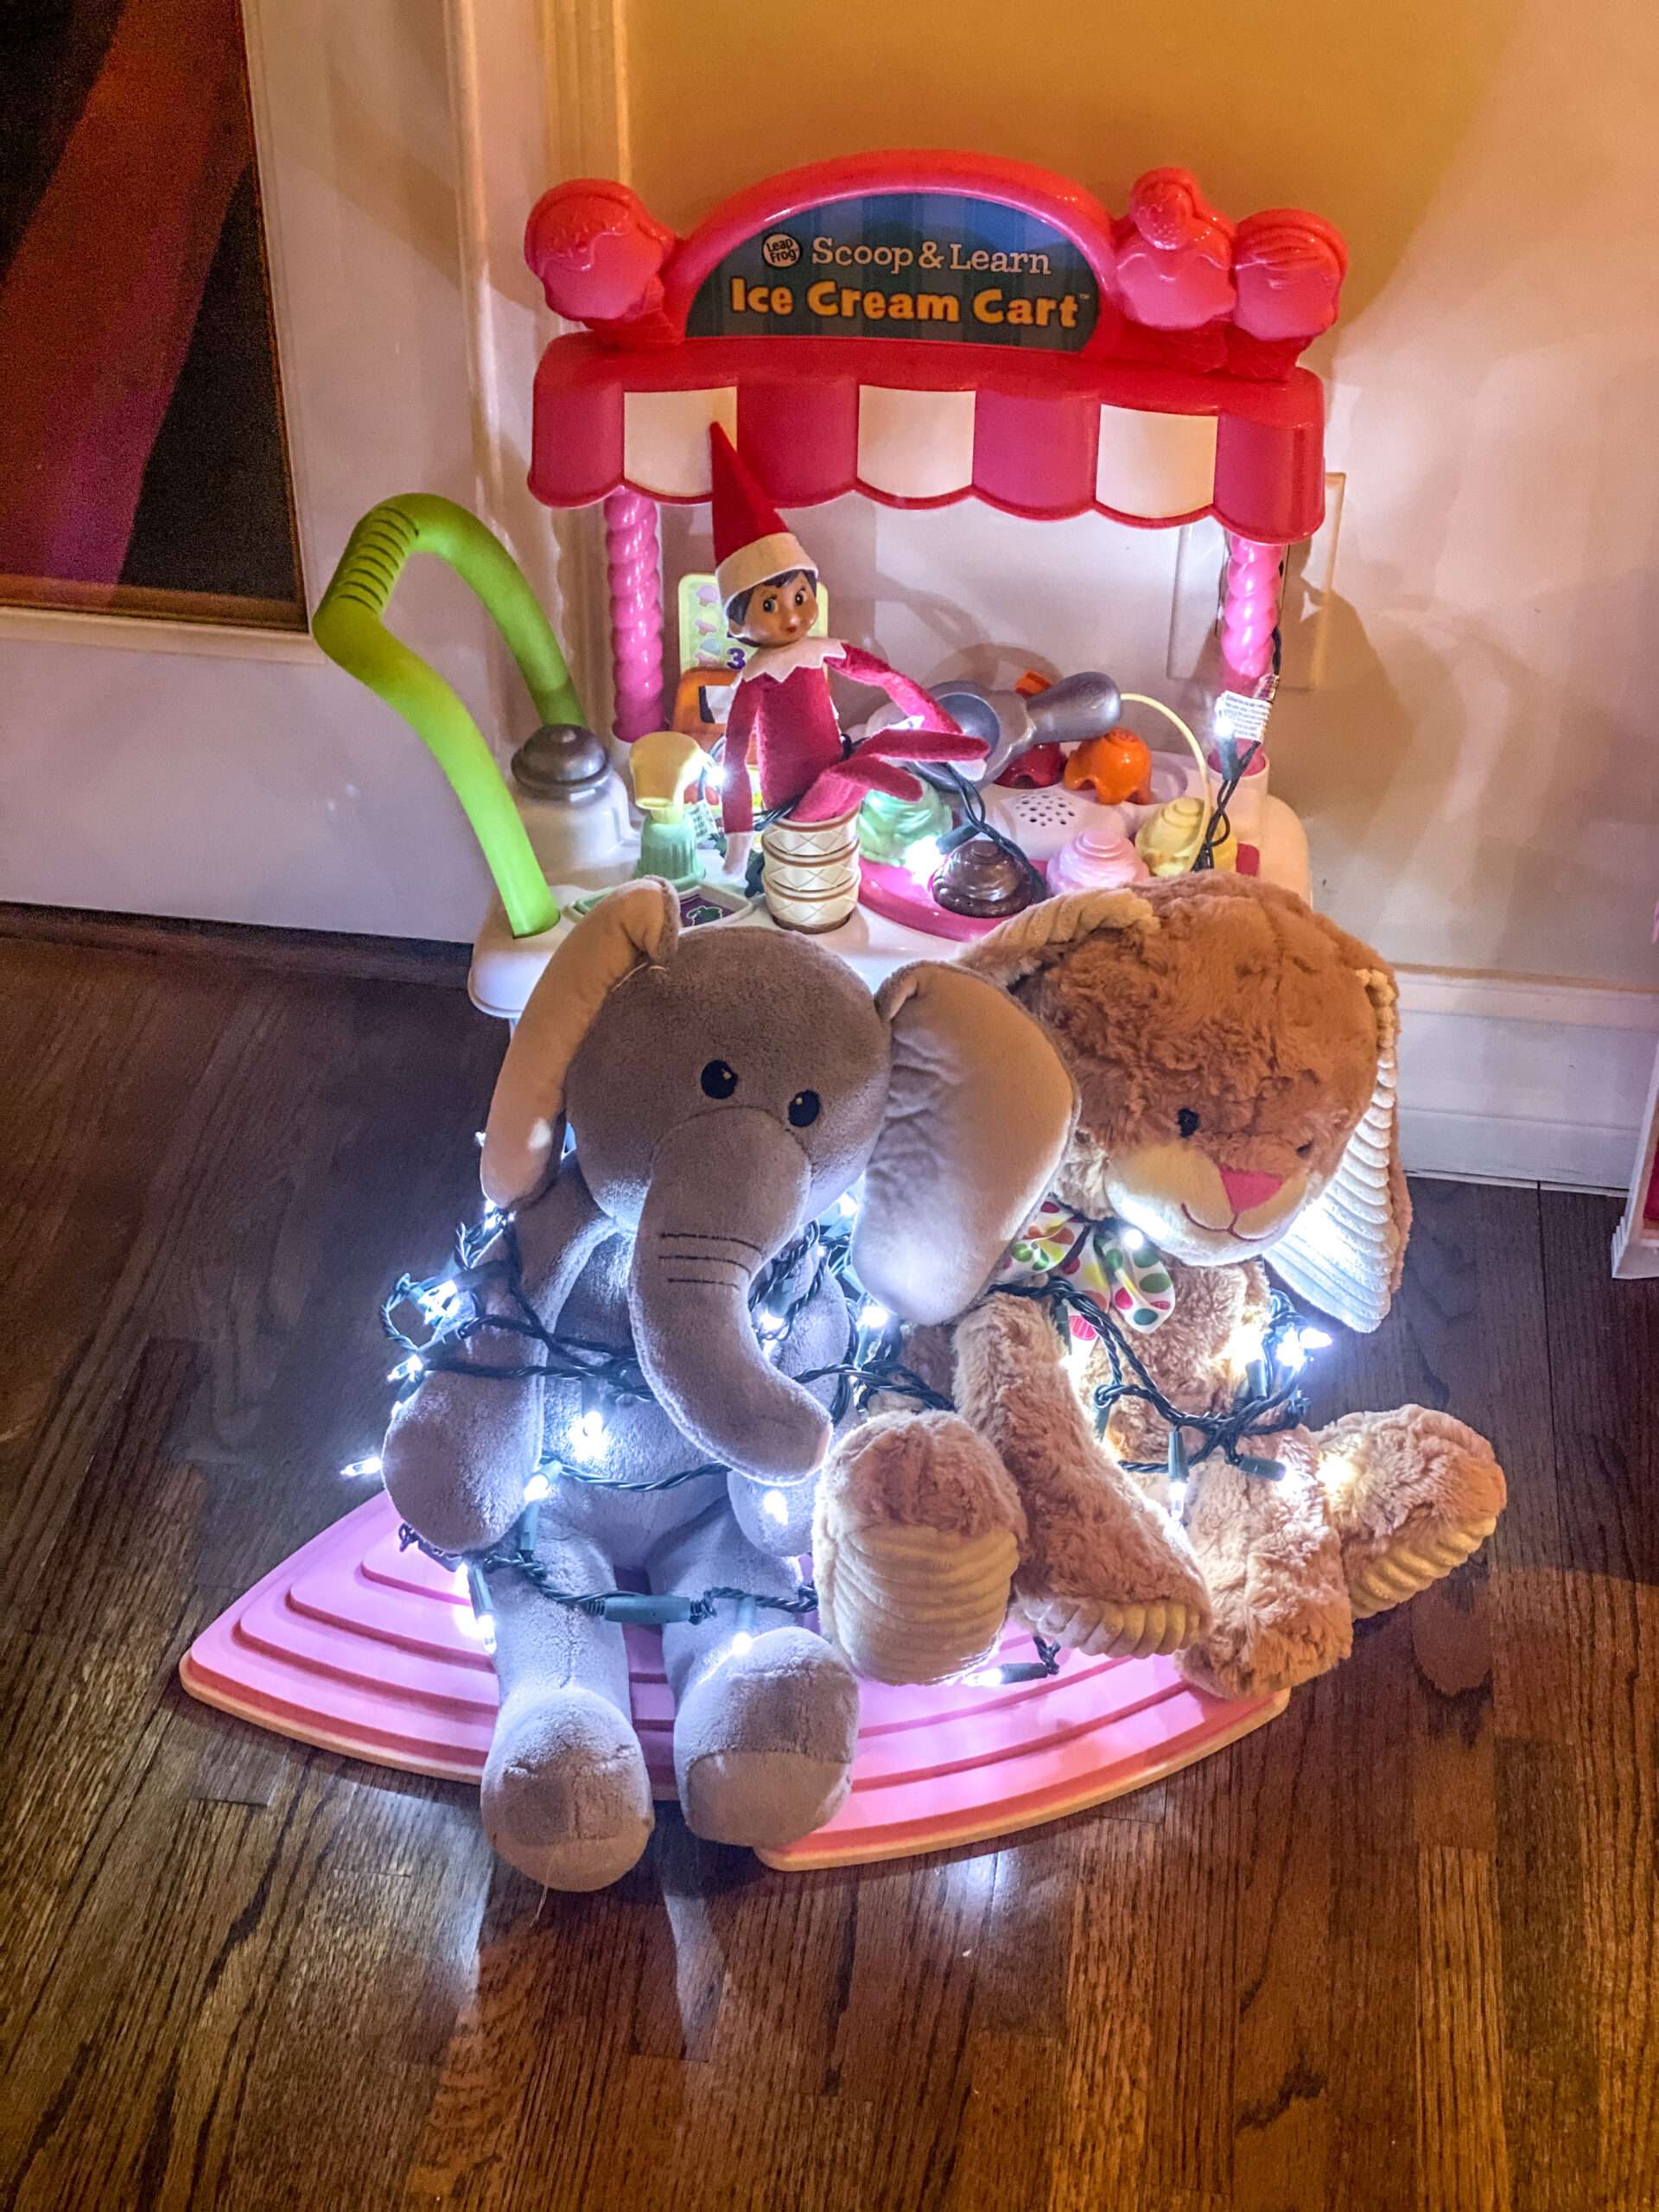 Used a strand of Christmas lights to tie up some stuffed animals. Fun & easy Elf on the Shelf ideas for your toddler or little kid. Quick to setup and lots of naughty and nice ideas, perfect to bring some Christmas magic to your home. #ElfOnTheShelf #ElfIdeas #ElfOnTheShelfIdeas #Christmas #ChristmasMagic